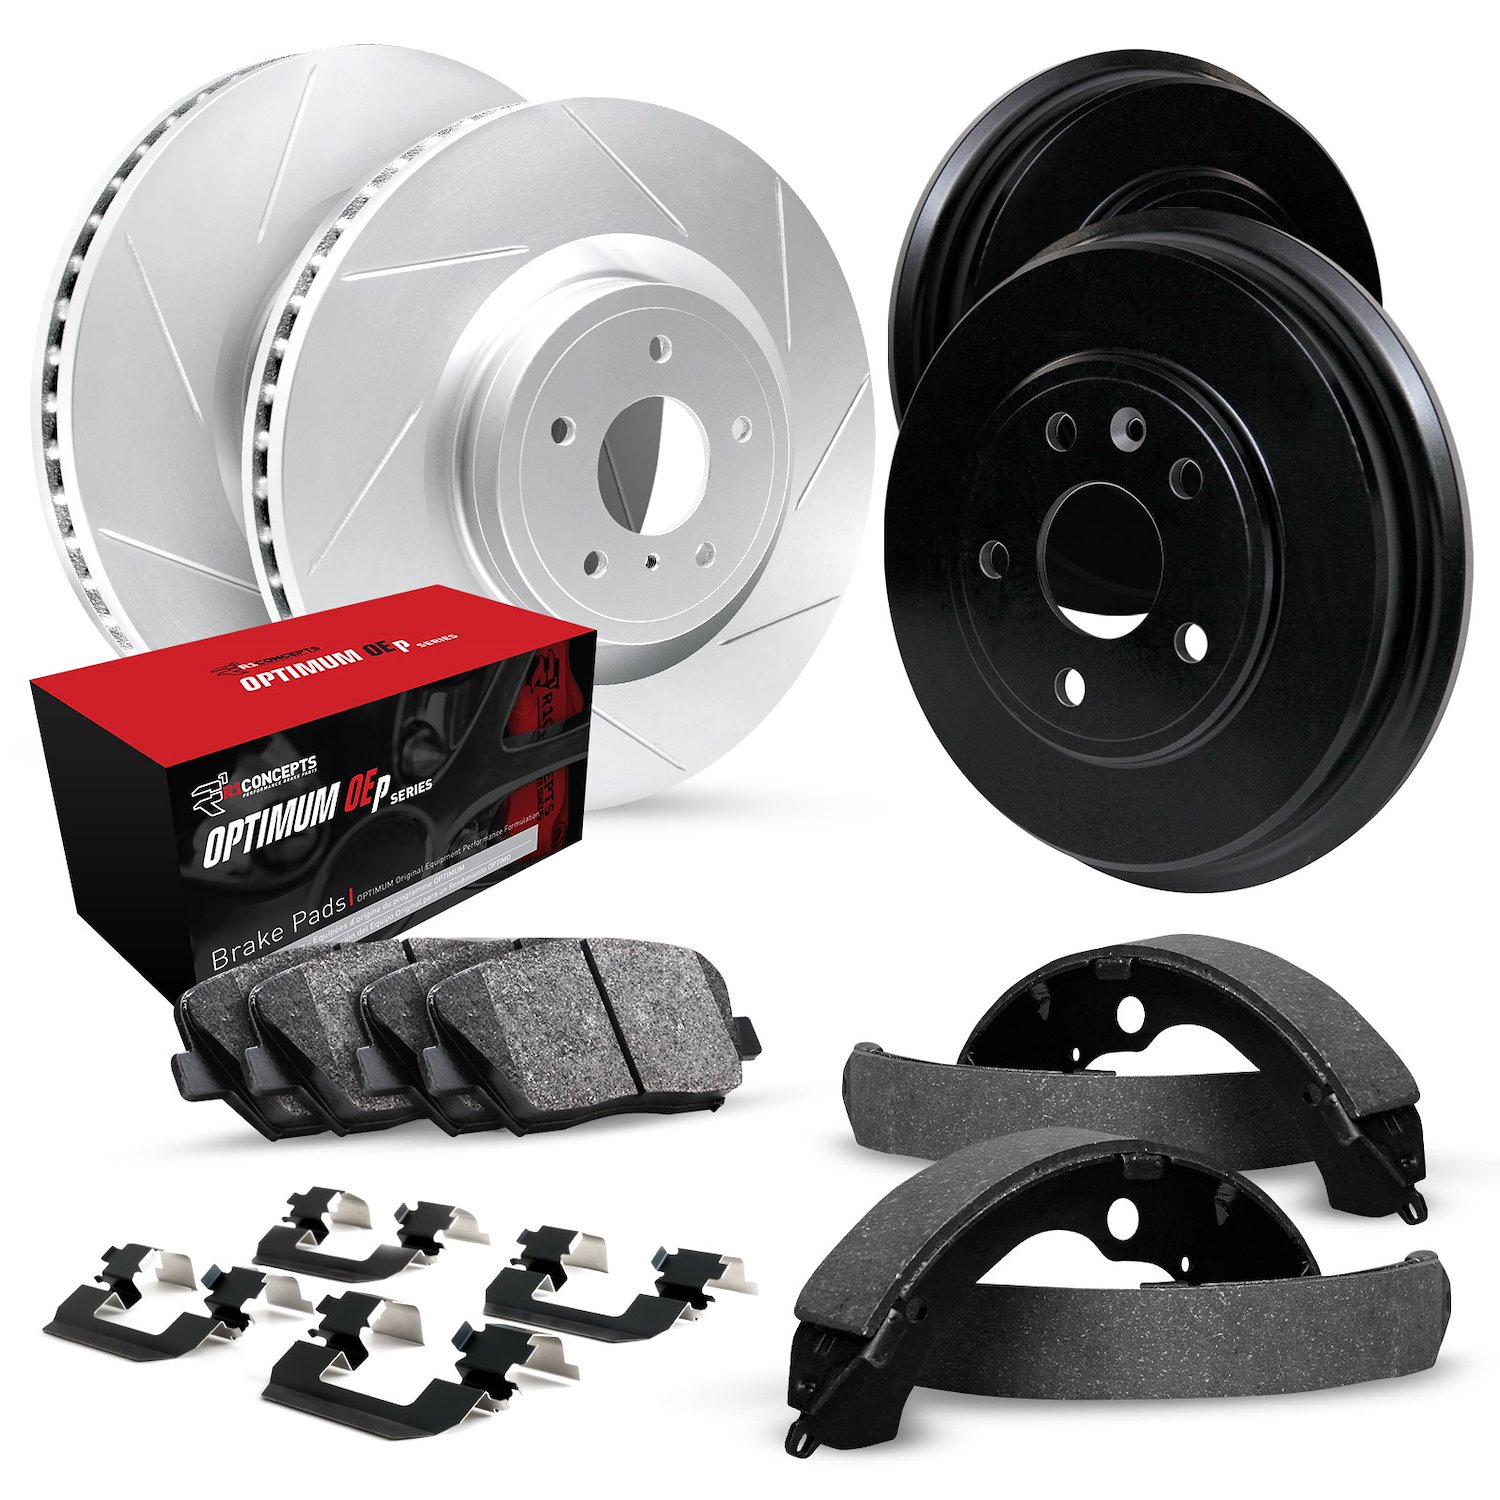 GEO-Carbon Slotted Brake Rotor & Drum Set w/Optimum OE Pads, Shoes, & Hardware, 2002-2007 GM, Position: Front & Rear